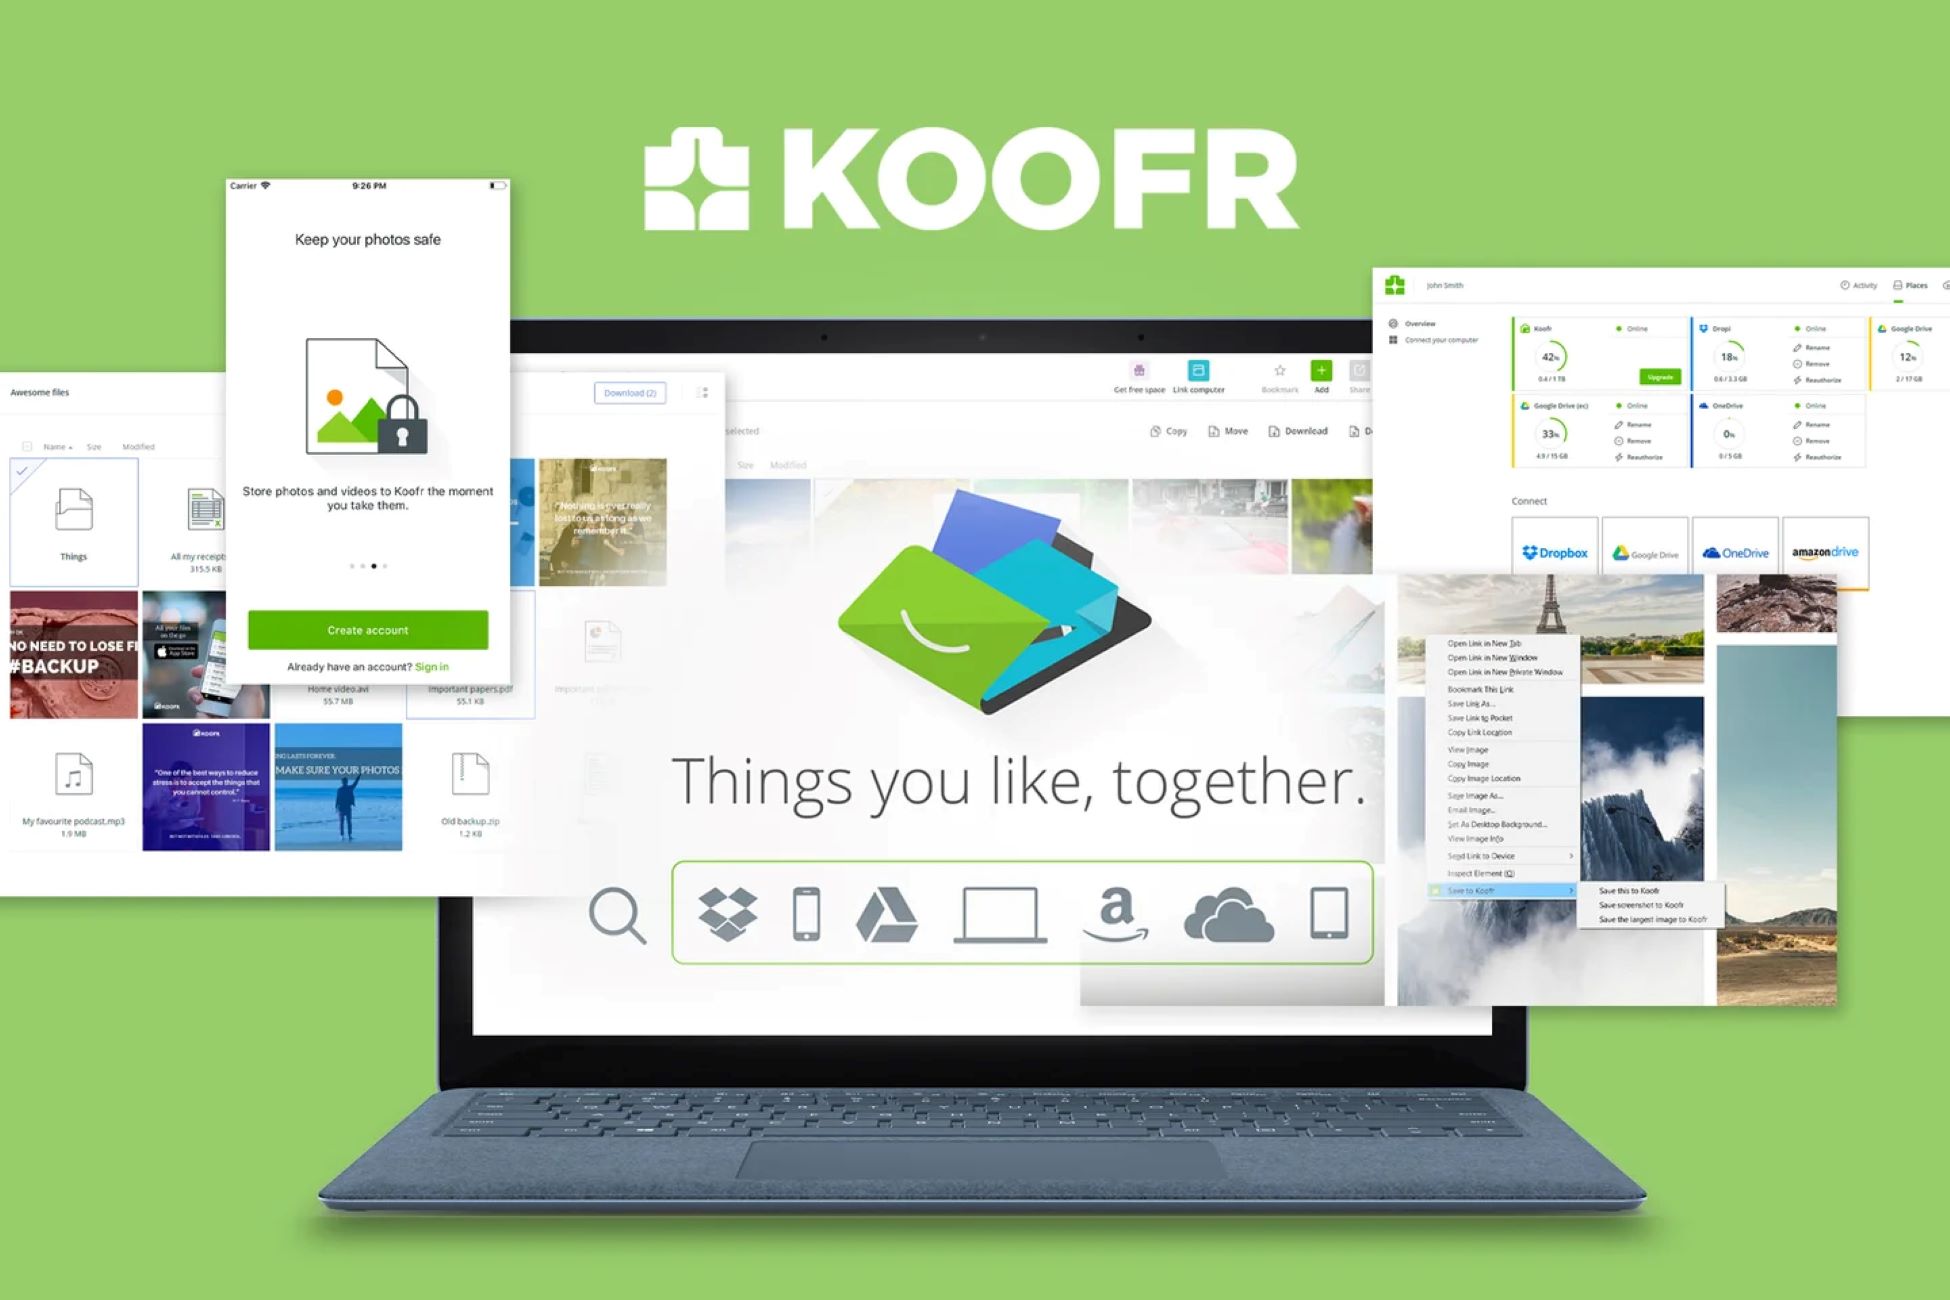 say-goodbye-to-low-storage-notifications-with-1tb-of-koofr-cloud-space